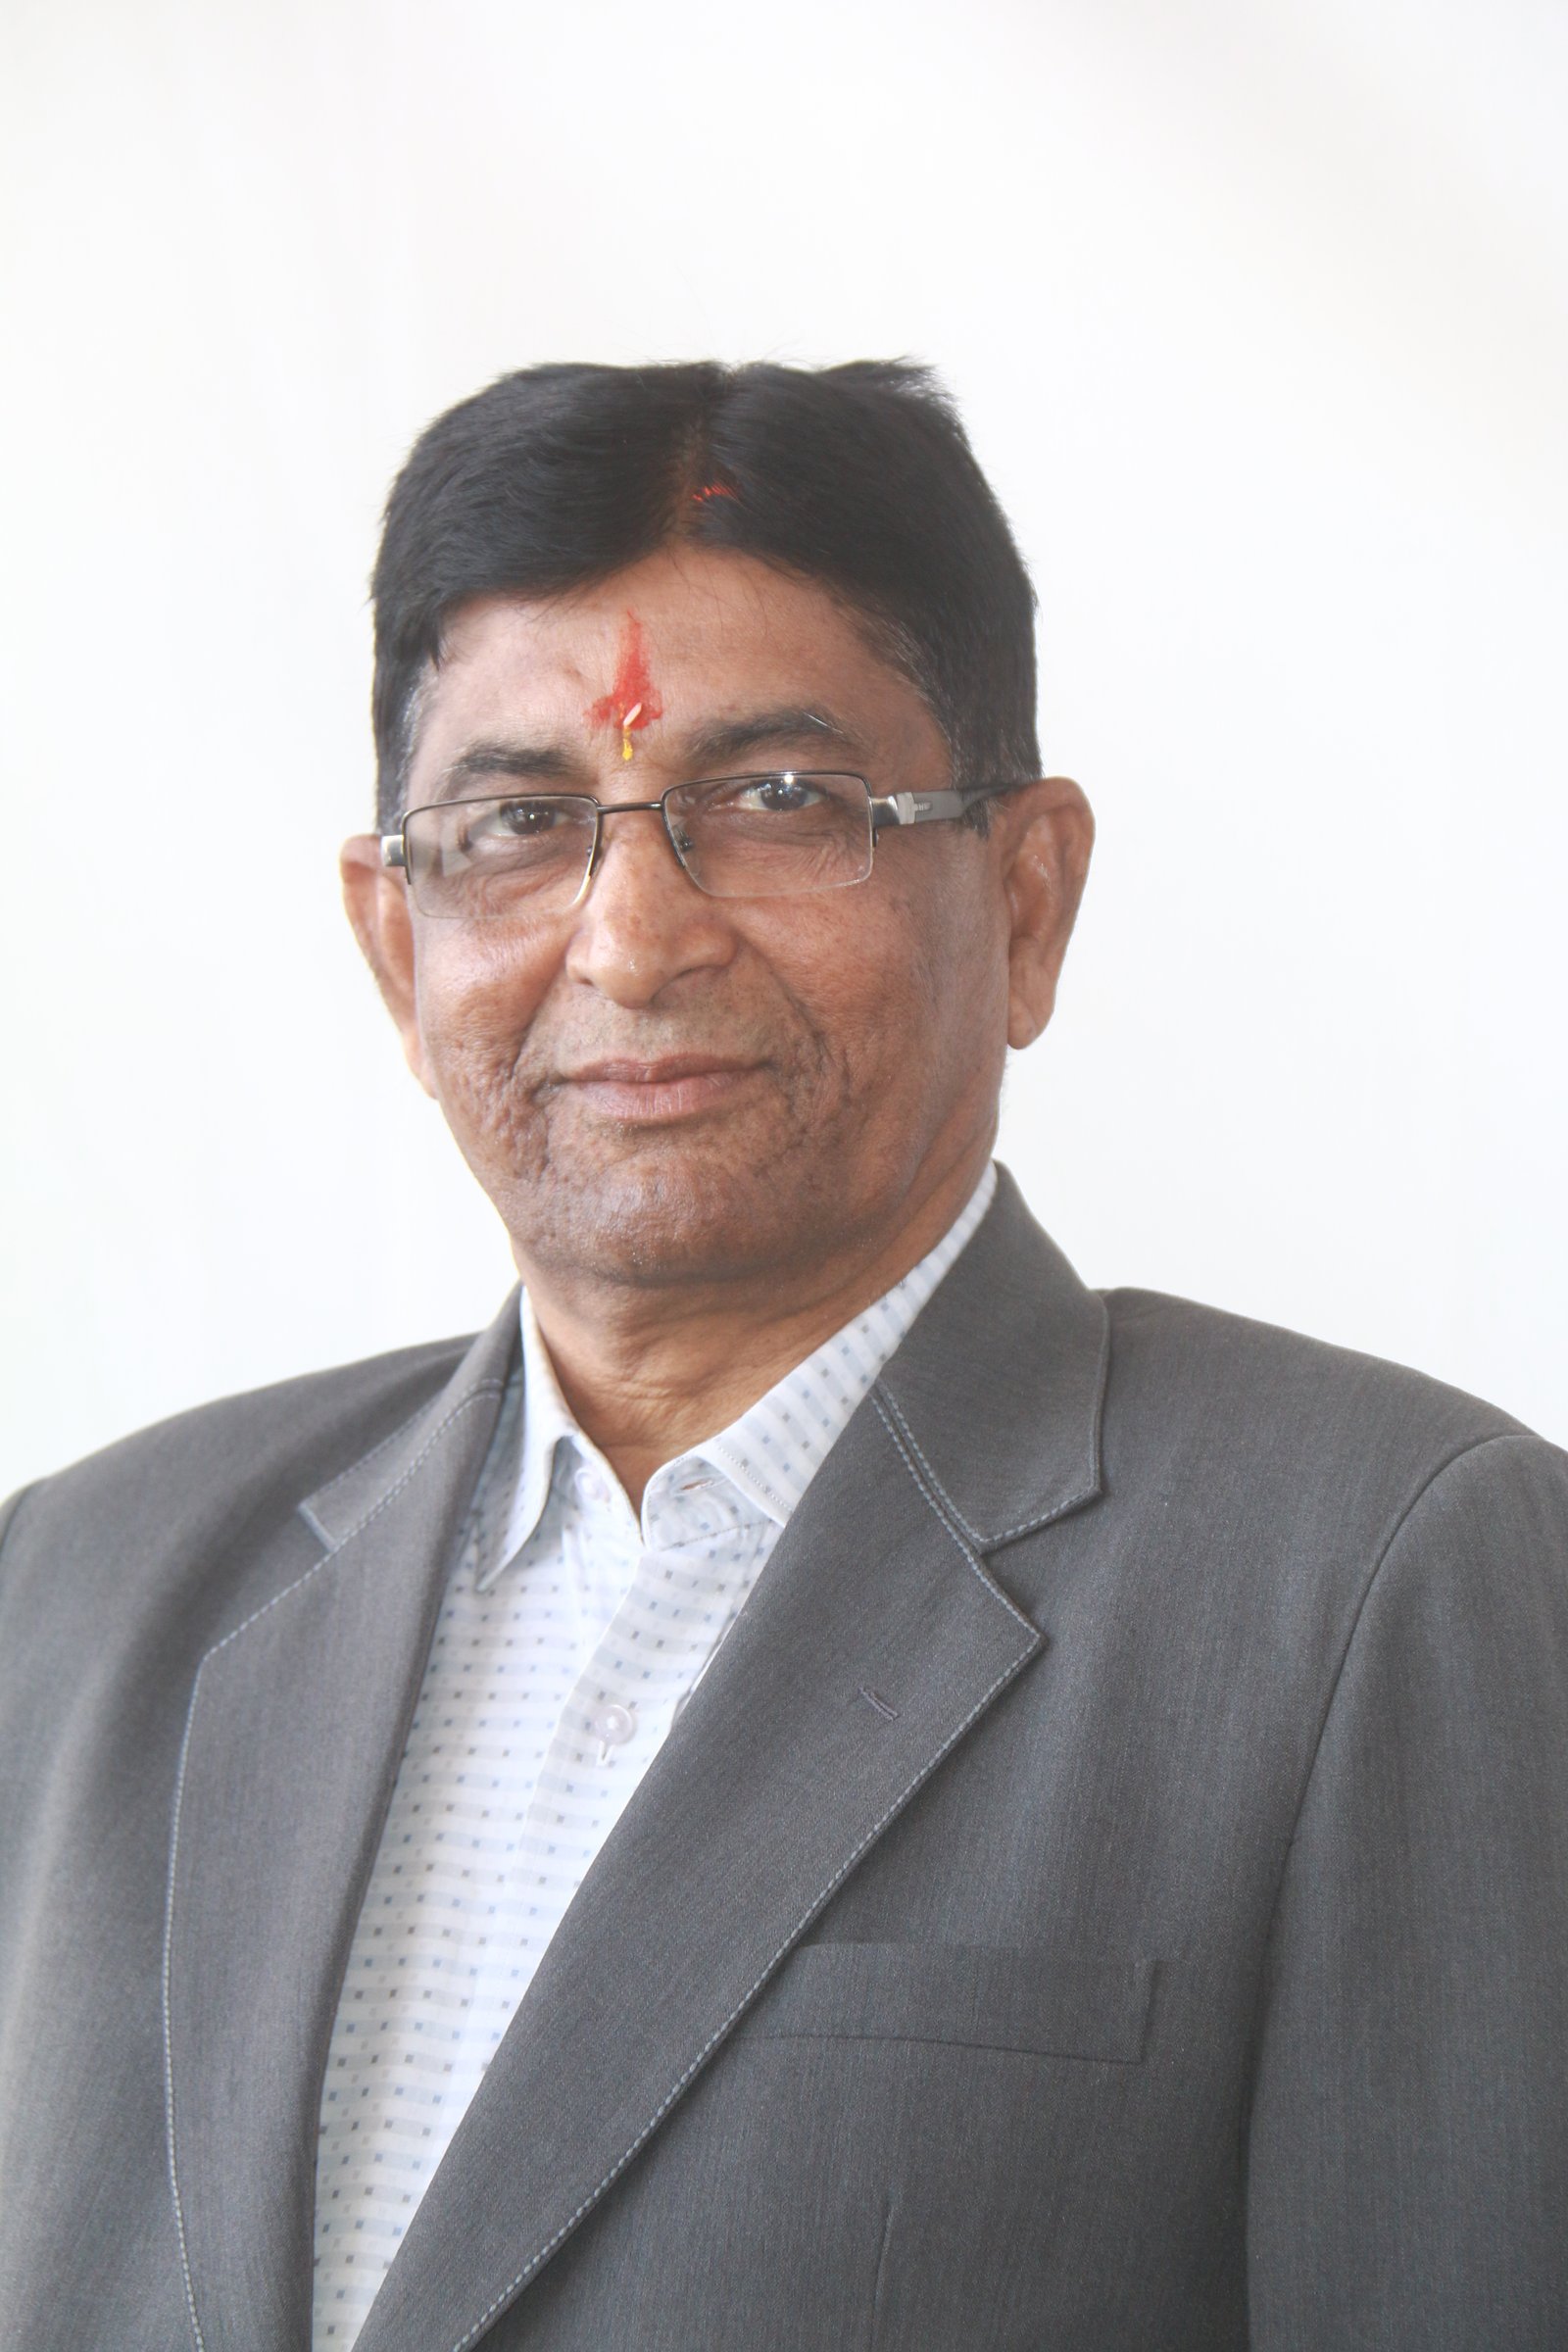 MIA office bearers <p>IMDT. PAST PRESIDENT<br /> GYANI RAM MALOO<br /> WEST INDIA TEXTILE MILLS PVT. LTD.<br /> Cell : 9314714283</p> 